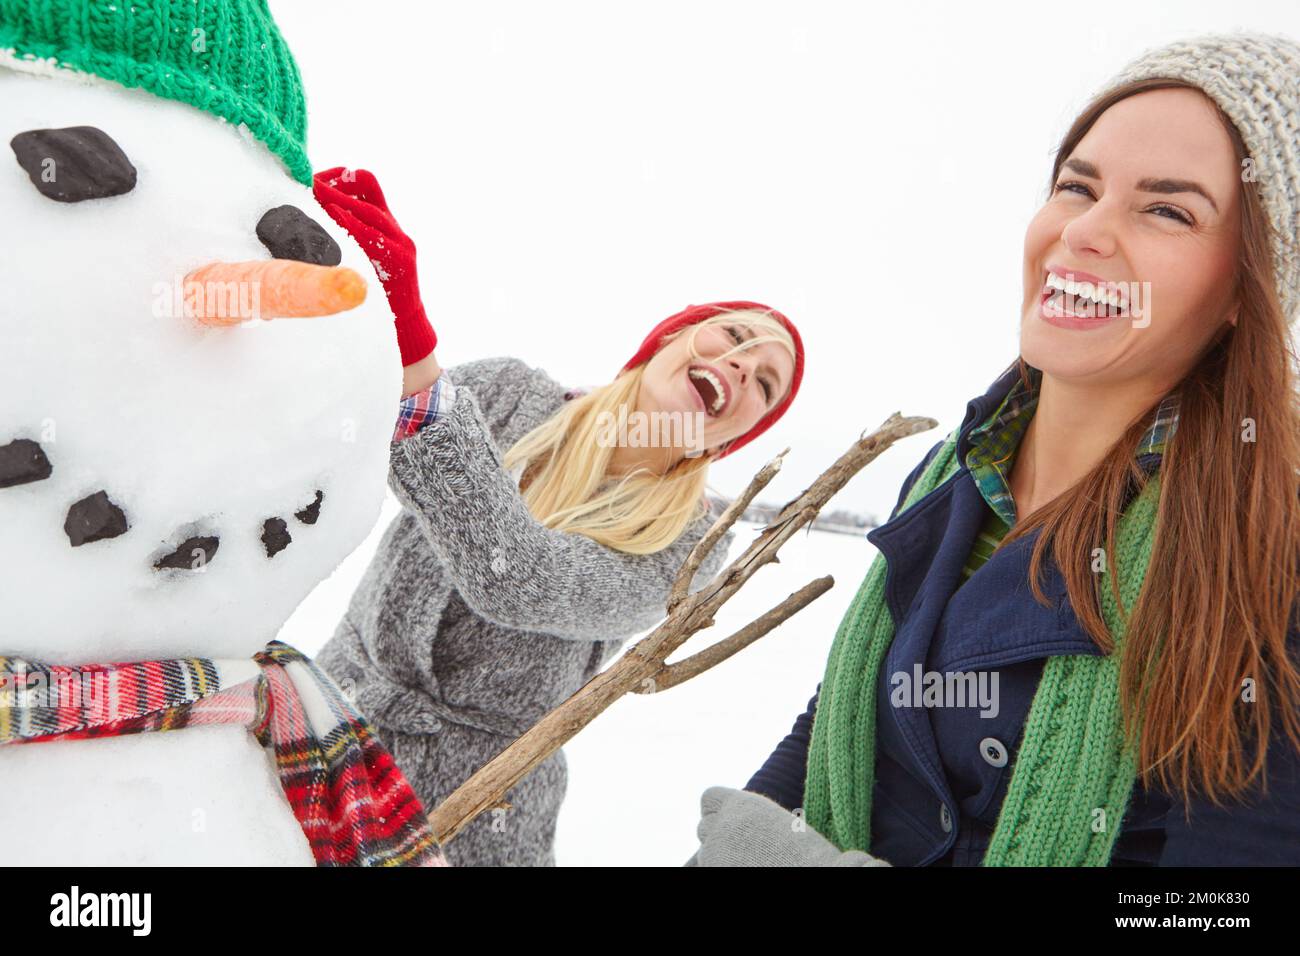 Friends, snowman and women building in the snow on a cold winter day in the UK while having fun. Playing, playful female friendship while creating a Stock Photo